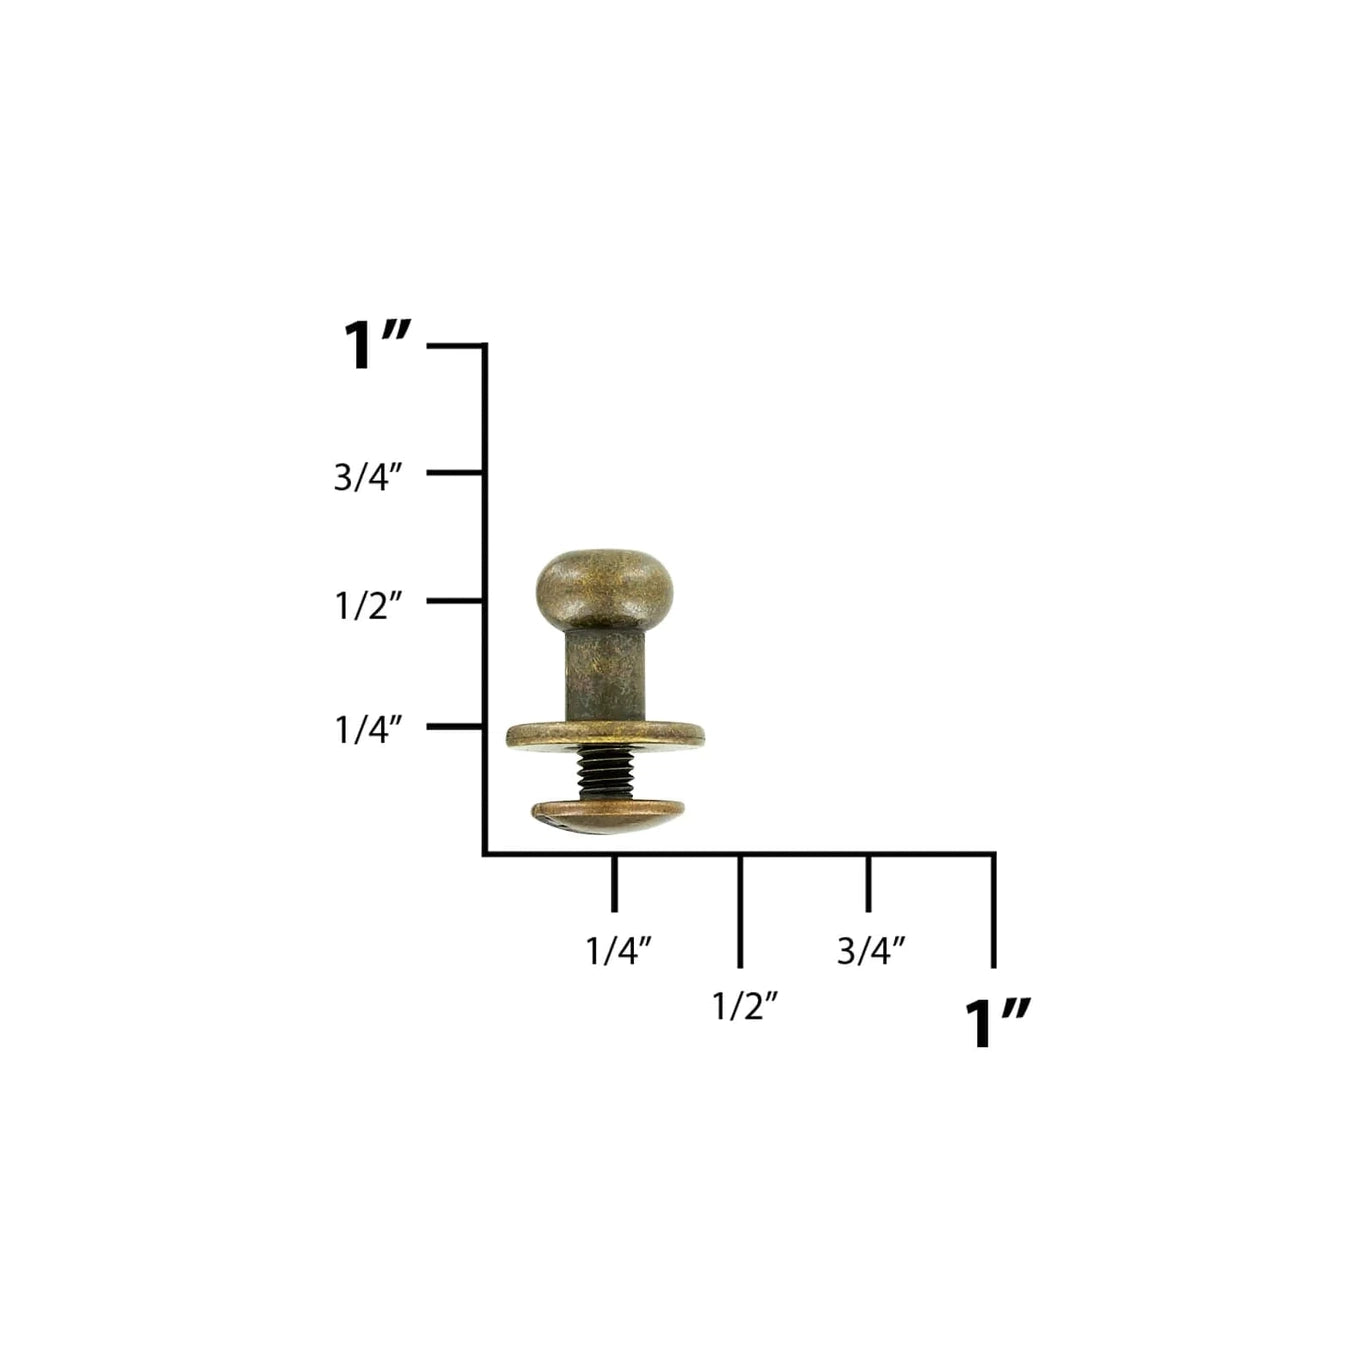 10mm, Antique Brass, Flat Top Collar Button Stud with Screw, Solid Brass - PK10, #P-1700-ANTB